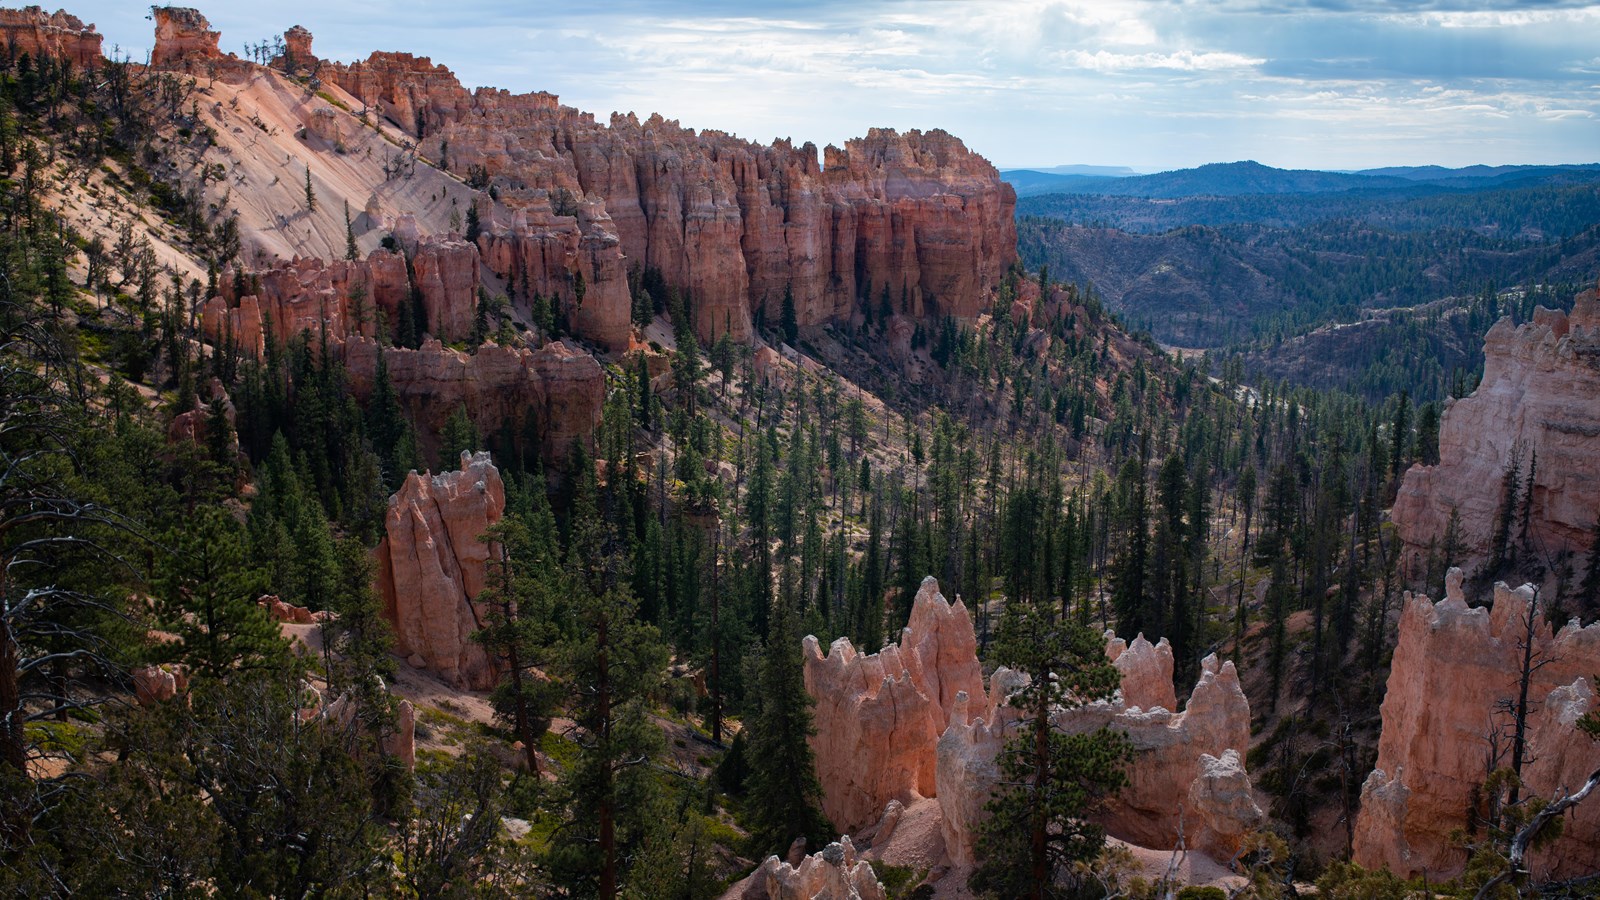 Forested canyon with tall bright orange limestone cliffs towering above